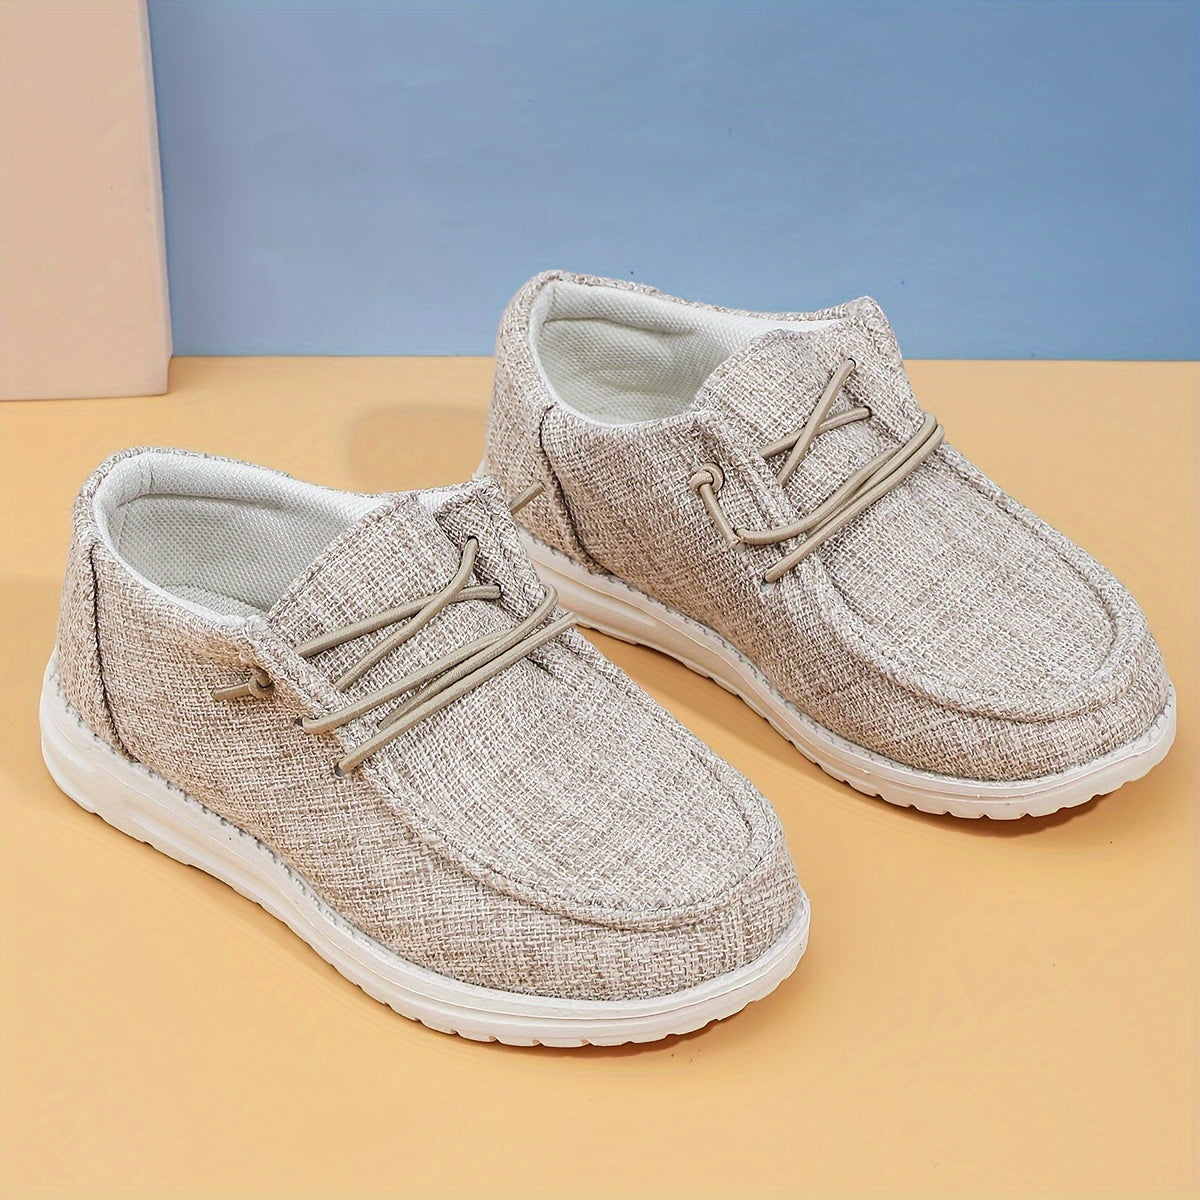 Kids Trendy Knit Loafers: Breathable & Non-Slip Sneakers